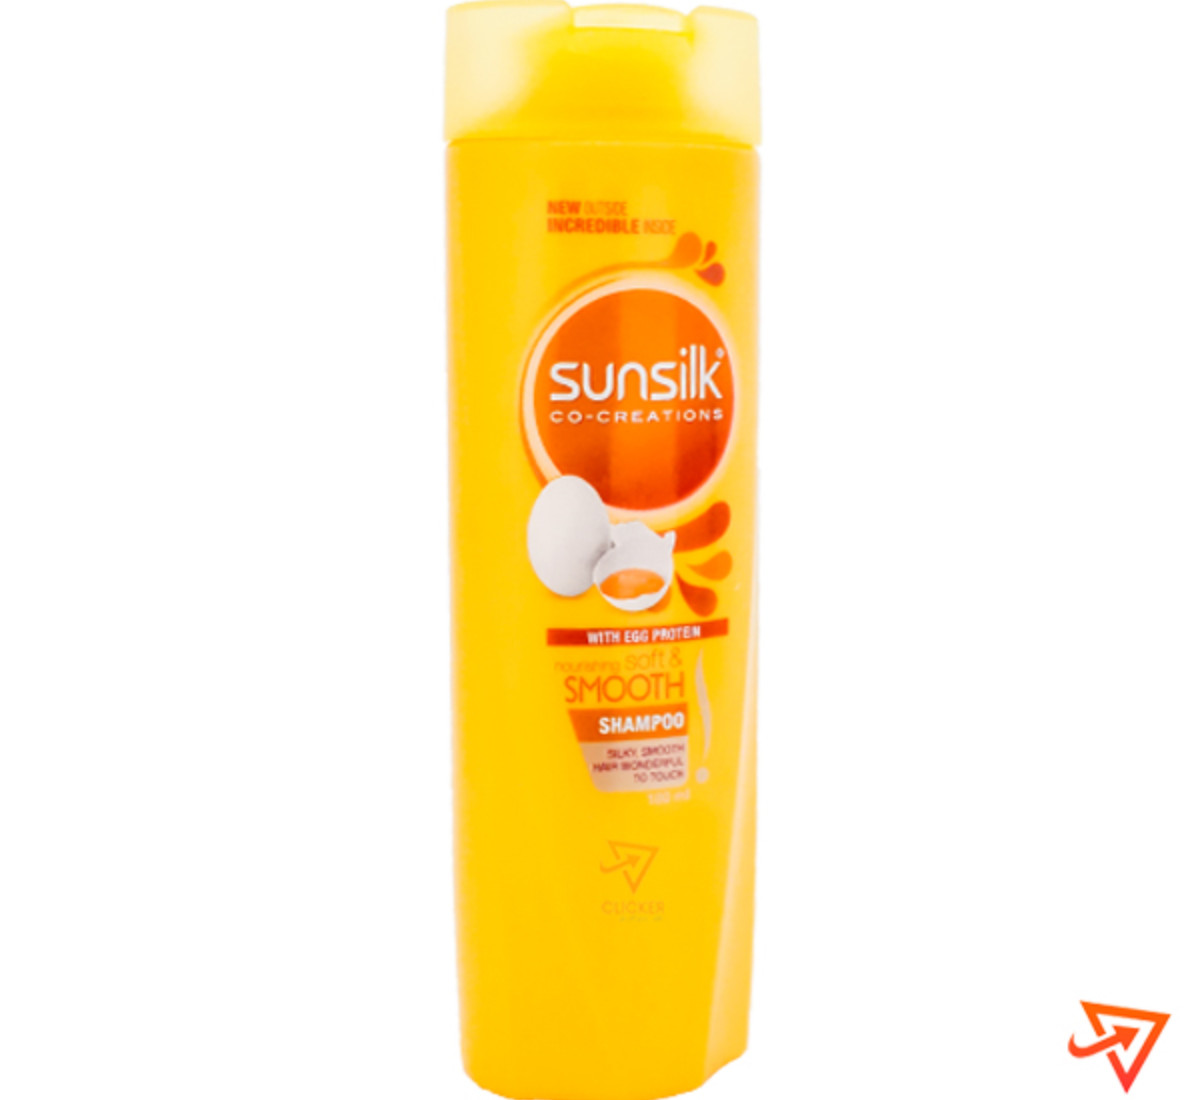 Clicker product 180ml SUNSILK with egg protein nourishing soft and smooth shampoo 1120